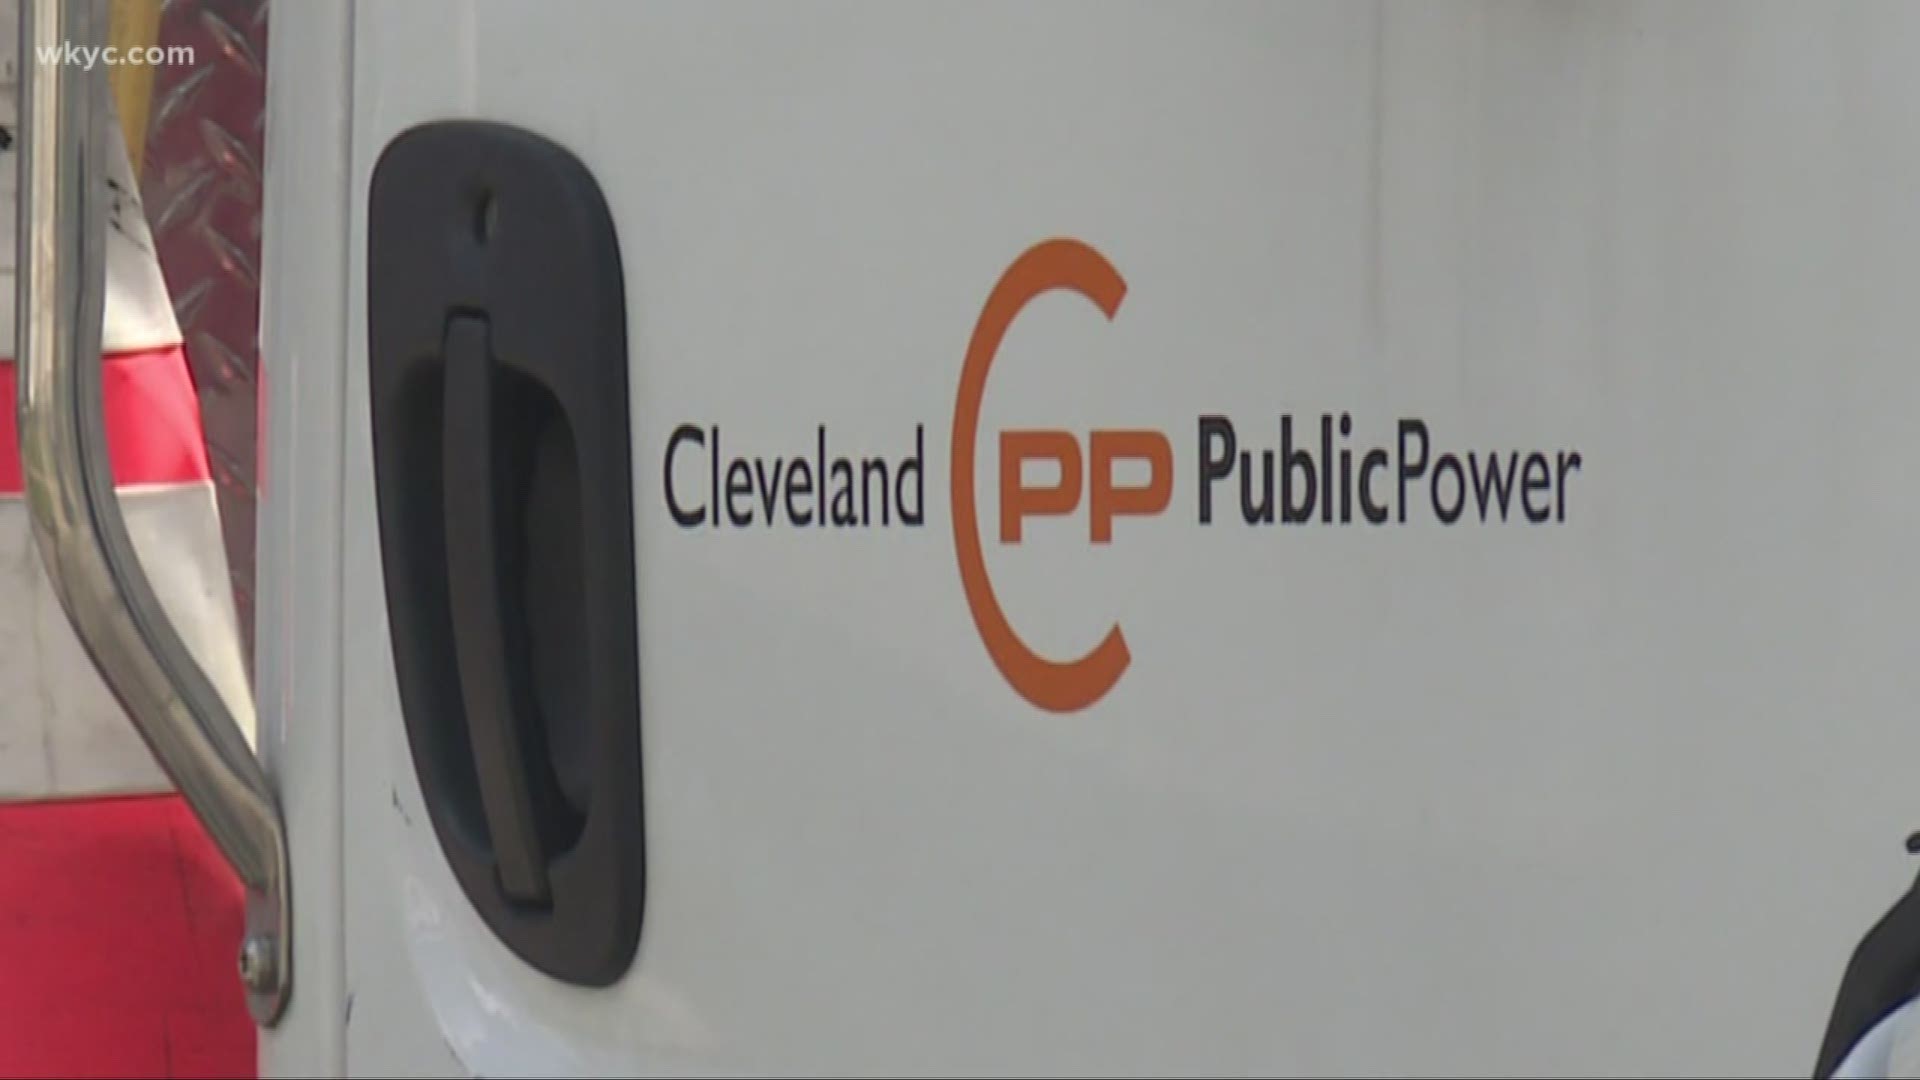 For the 72,000 customers of Cleveland Public Power, keeping the lights on could get more costly. The city of Cleveland is considering raising power rates.